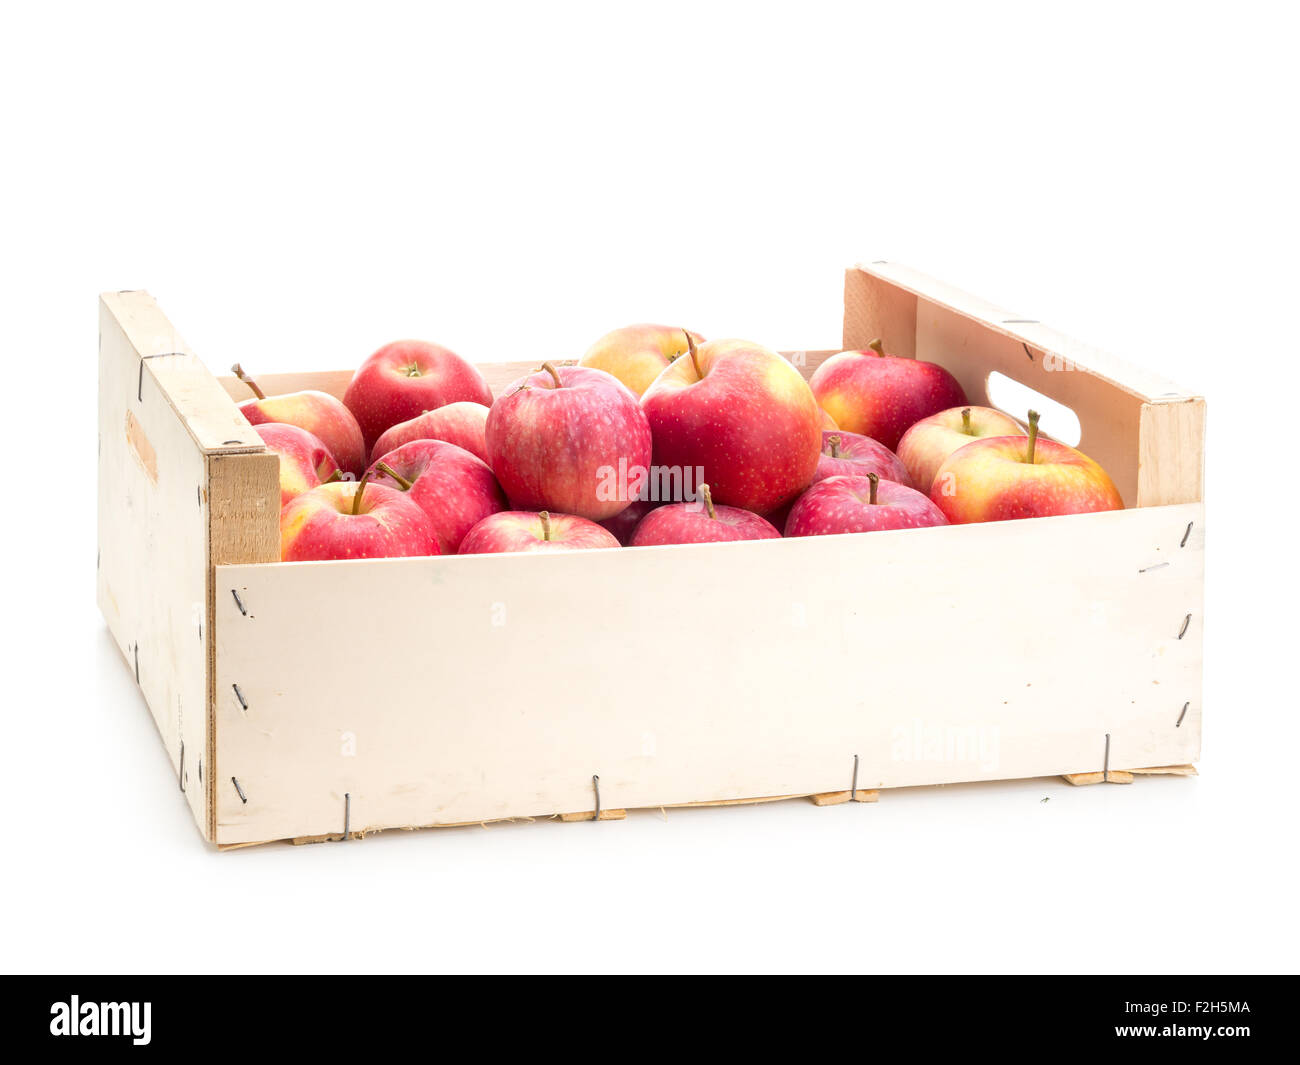 Wooden crate full of fresh and juicy red apples shot on white background Stock Photo